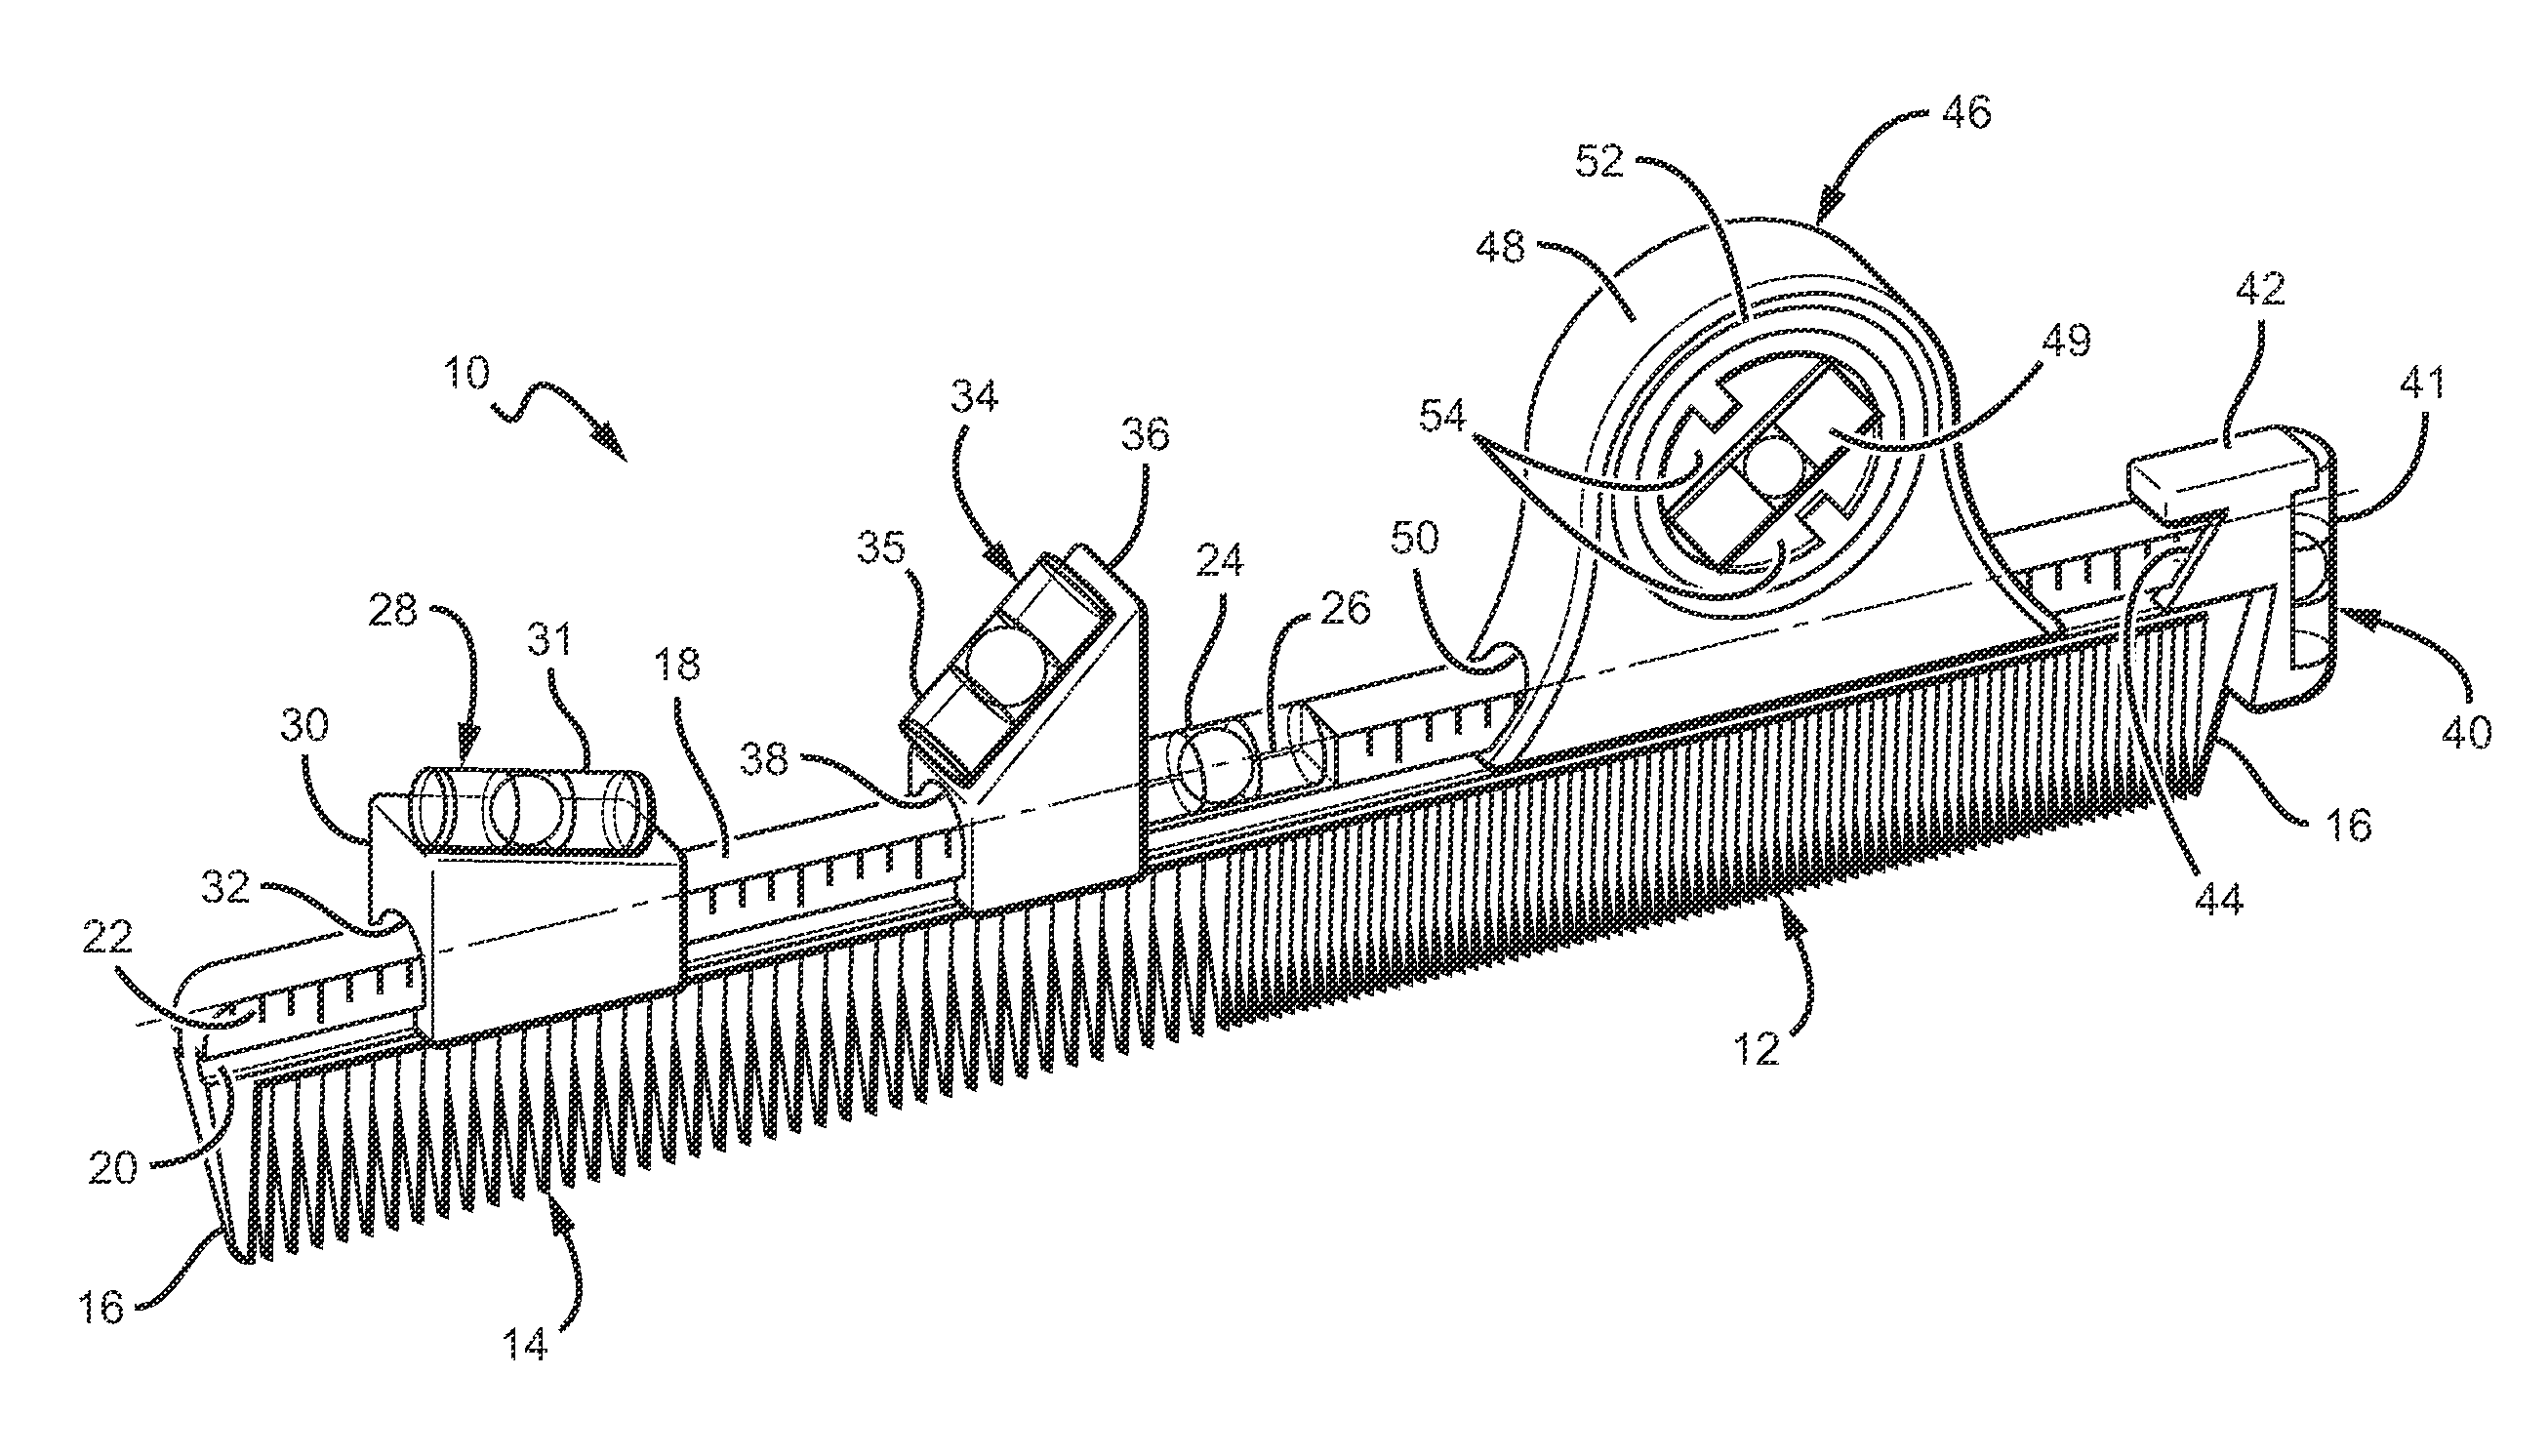 Flexible level system for a comb